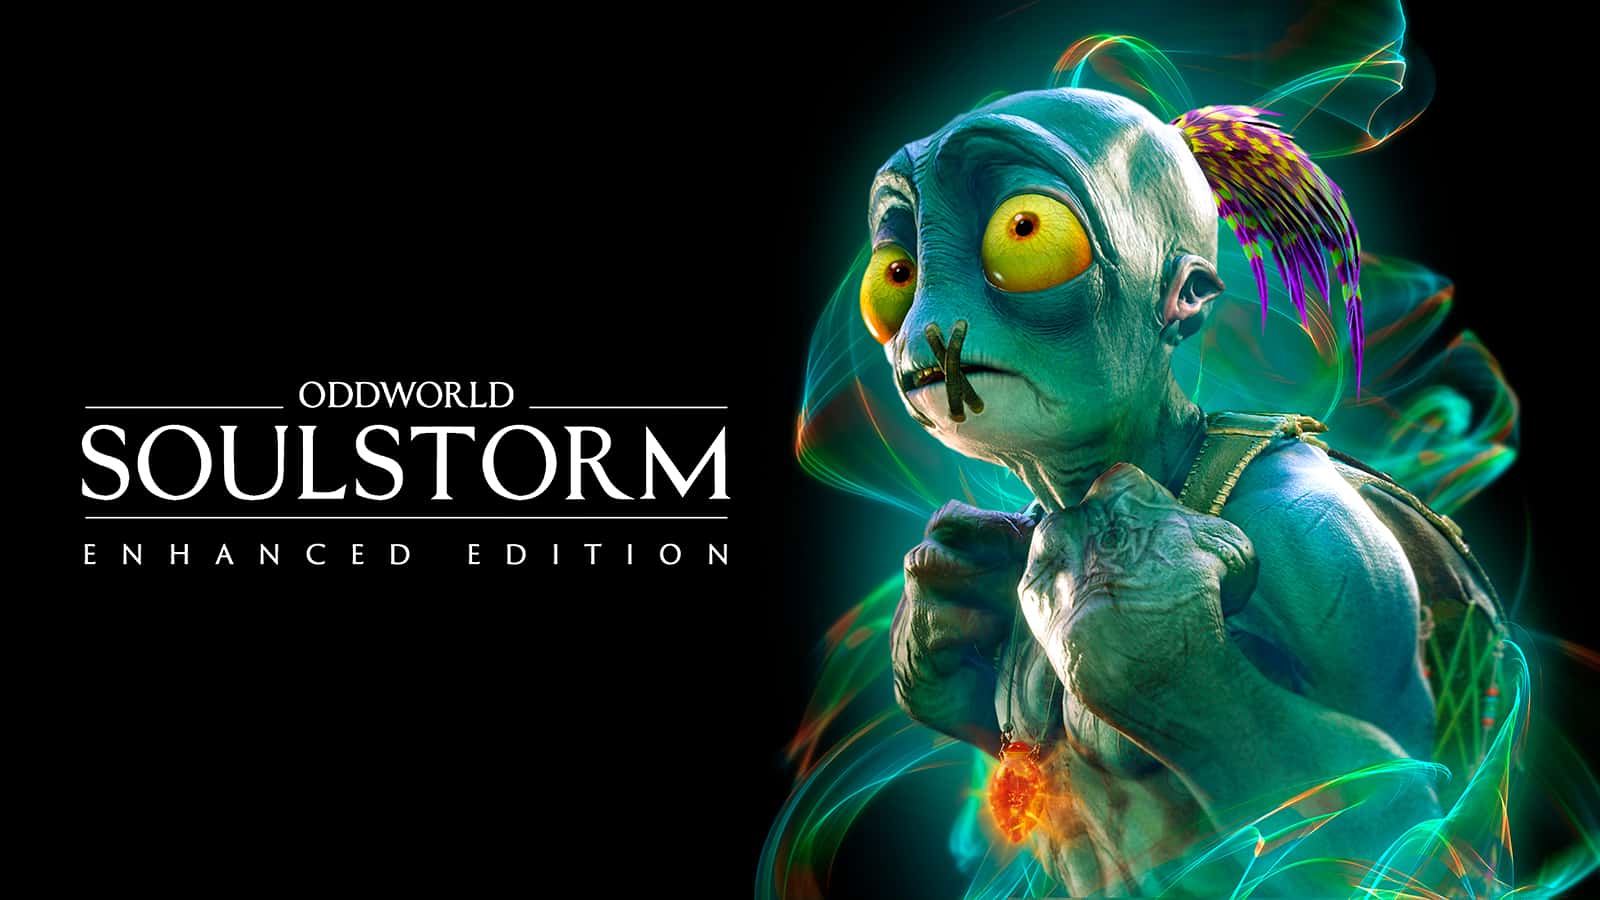 An image of Abe next to the Oddworld Soulstorm logo